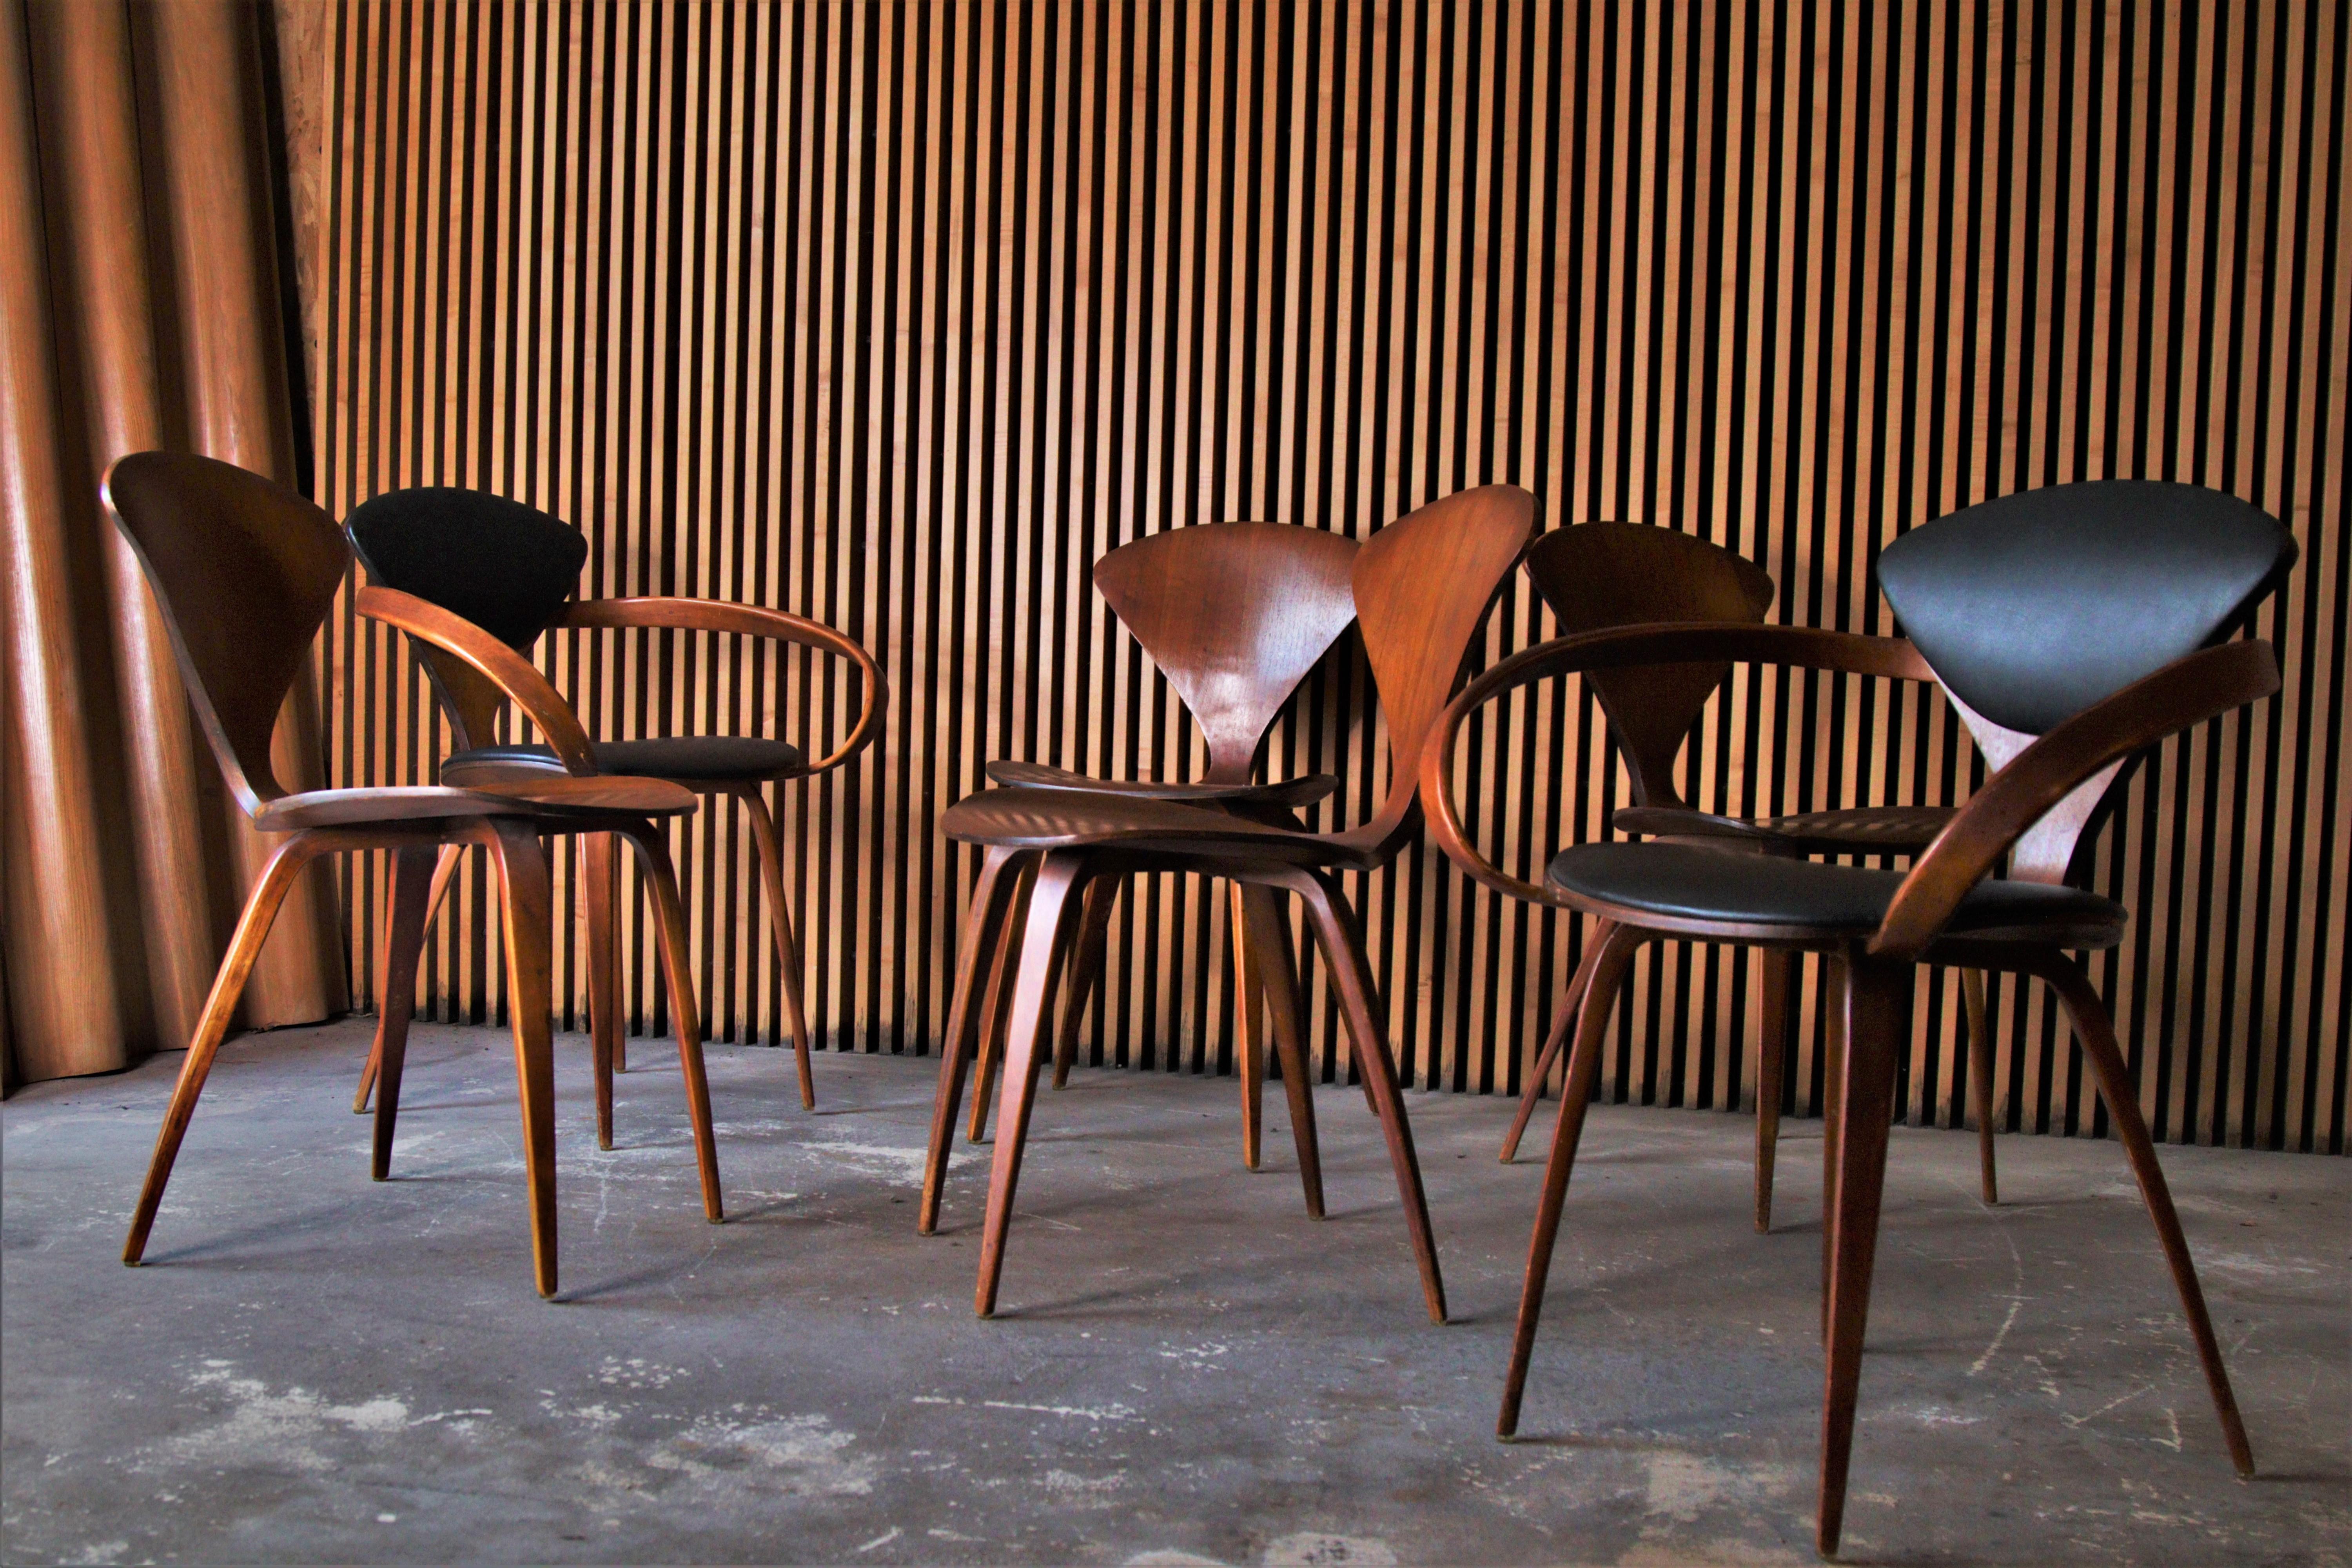 A set of 6 Pretzel dining chairs designed by Norman Cherner for Plycraft. The set consists of two armchairs with black leatherette upholstery and 4 upholstered walnut side chairs.

Dimensions:
Armchairs 31